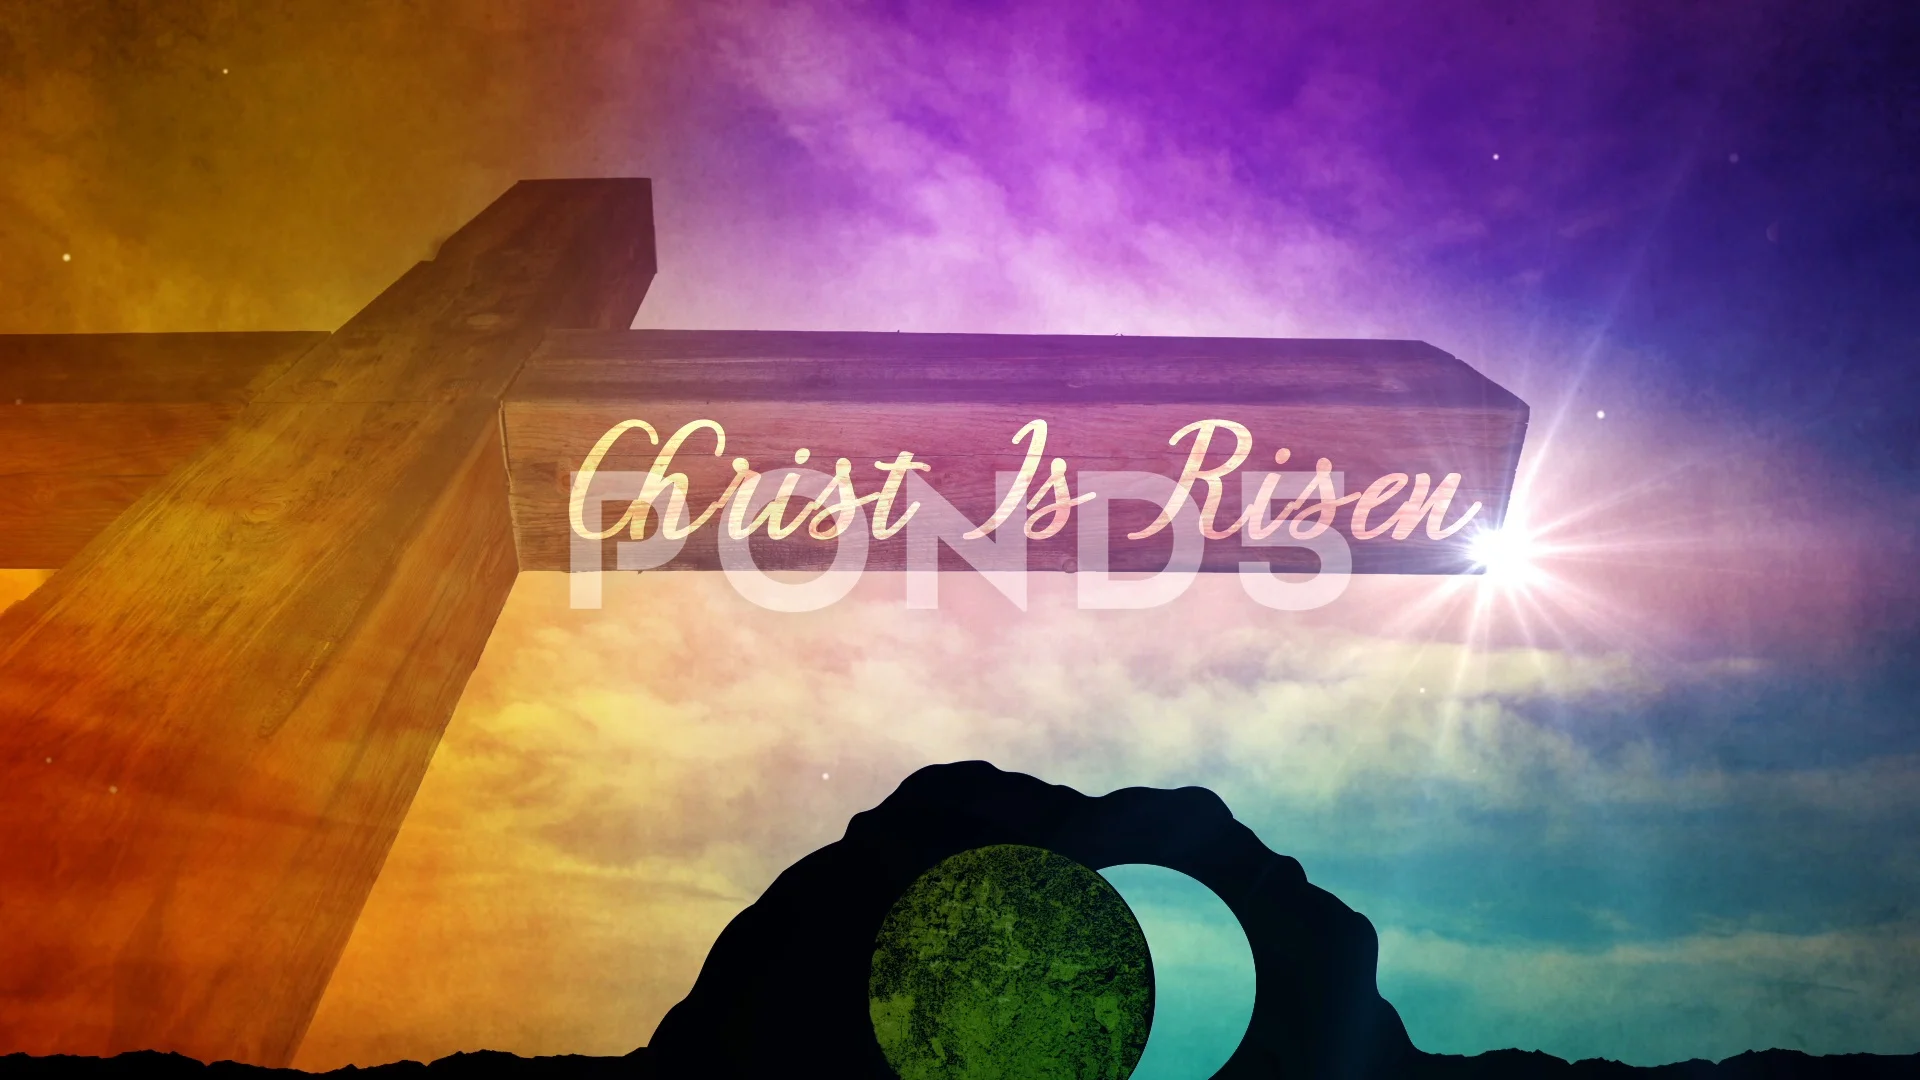 easter he is risen tomb